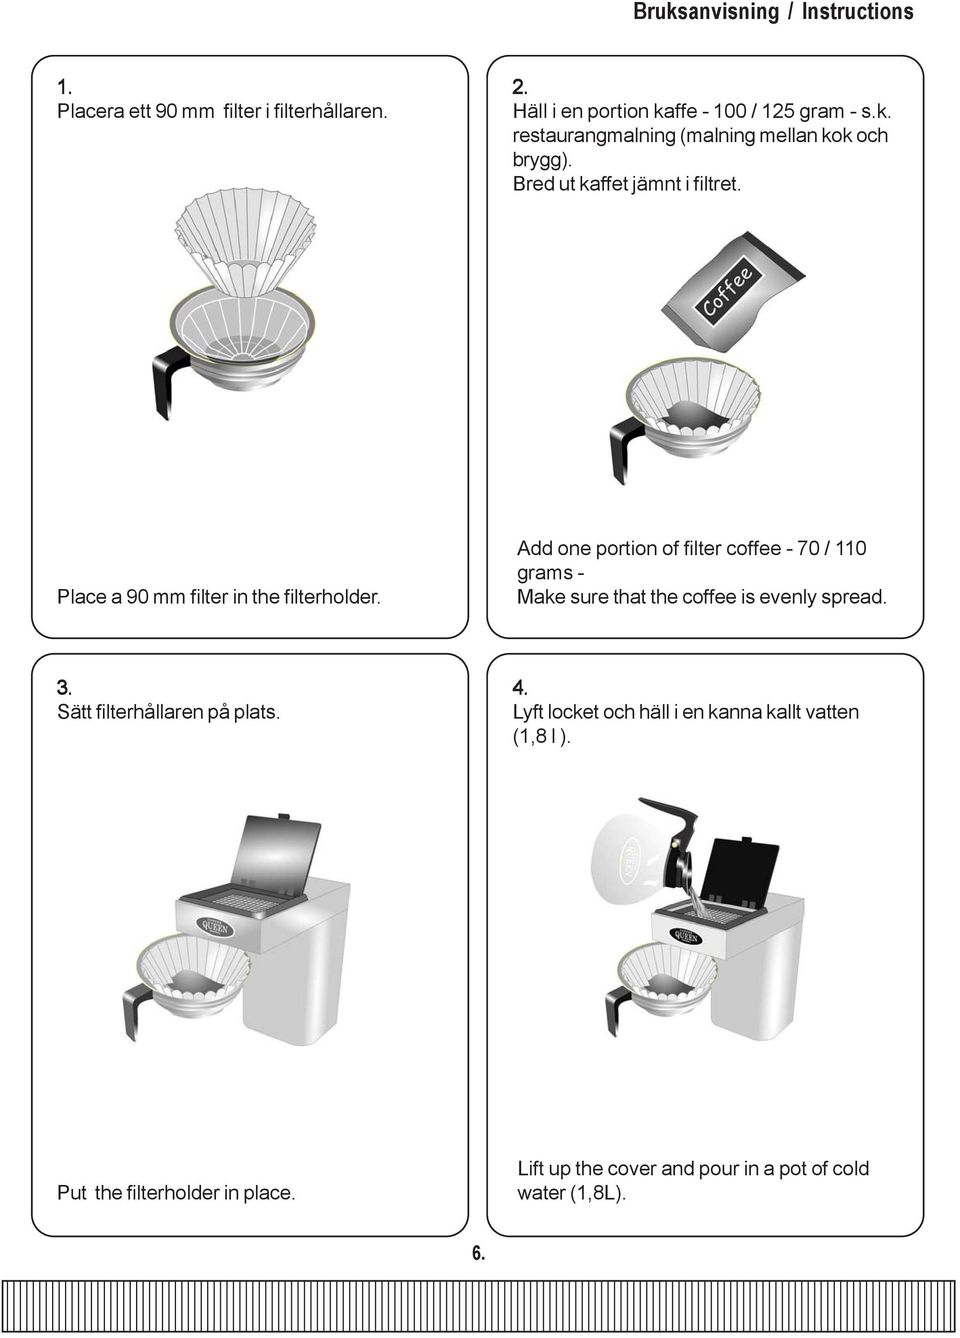 Add one portion of filter coffee - 70 / 110 grams - Make sure that the coffee is evenly spread. 3. Sätt filterhållaren på plats. 4.